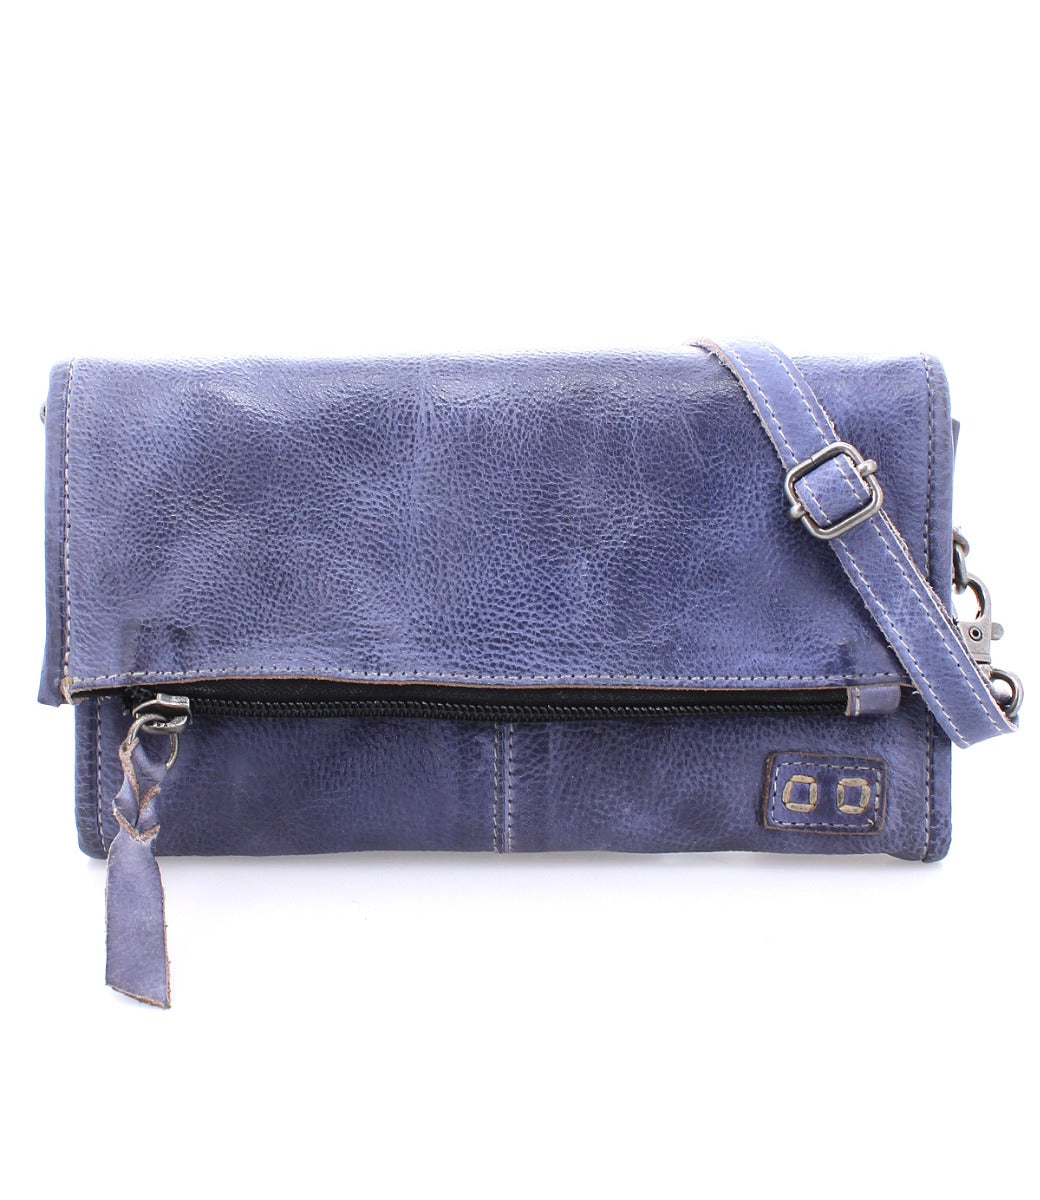 A blue leather Amina clutch bag with an adjustable strap by Bed Stu.